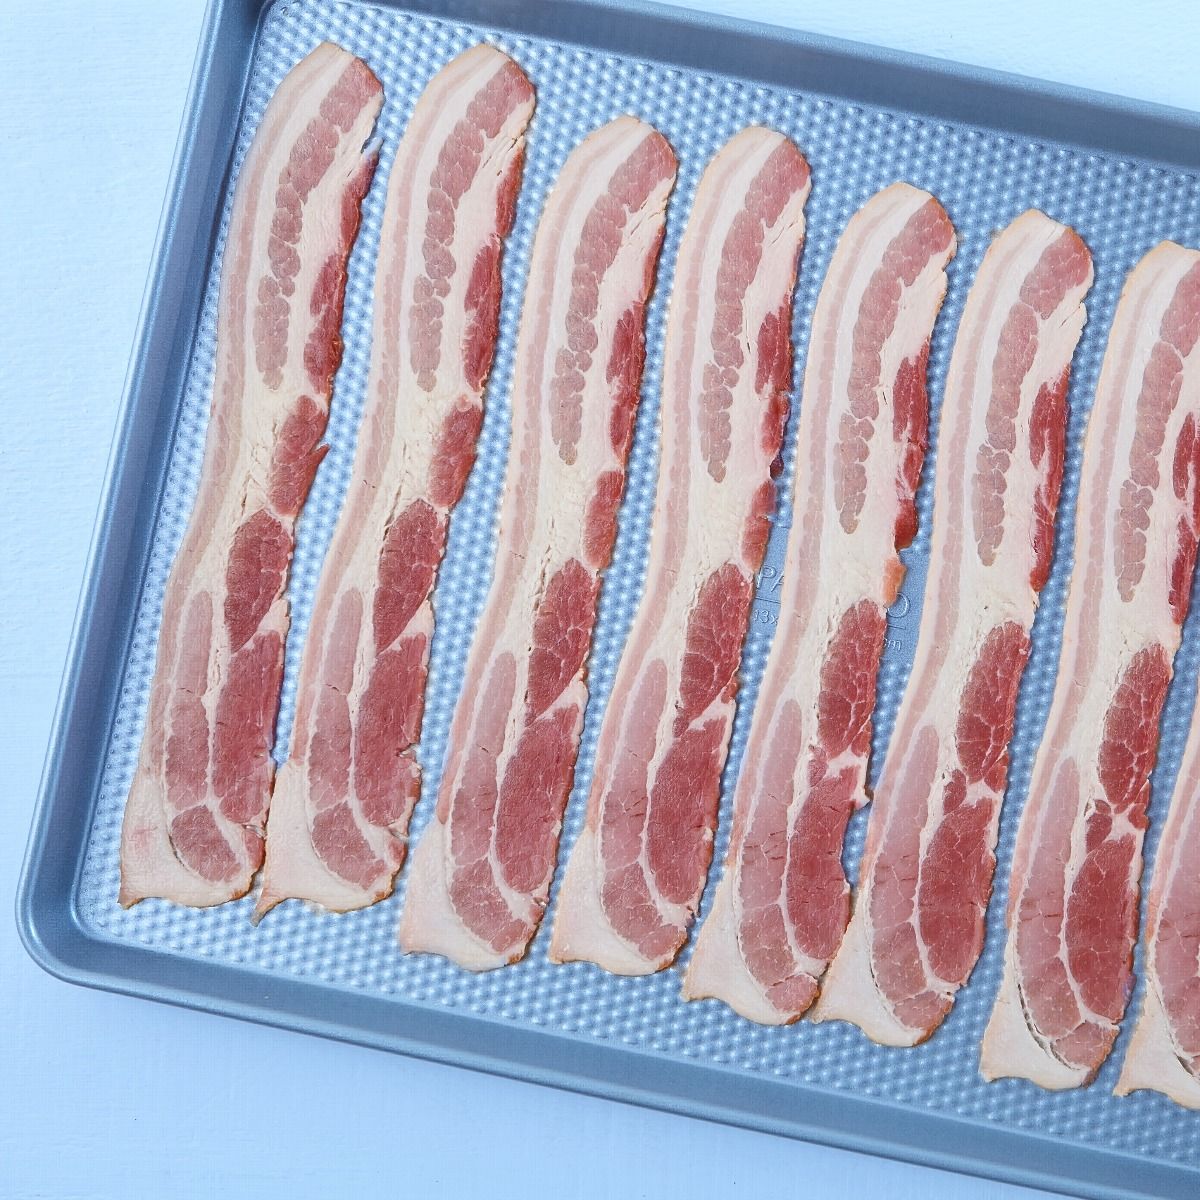 Fresh sliced applewood smoked flavour bacon, 17 slices / 2 '' (formerly 16-18 slices / Lb)